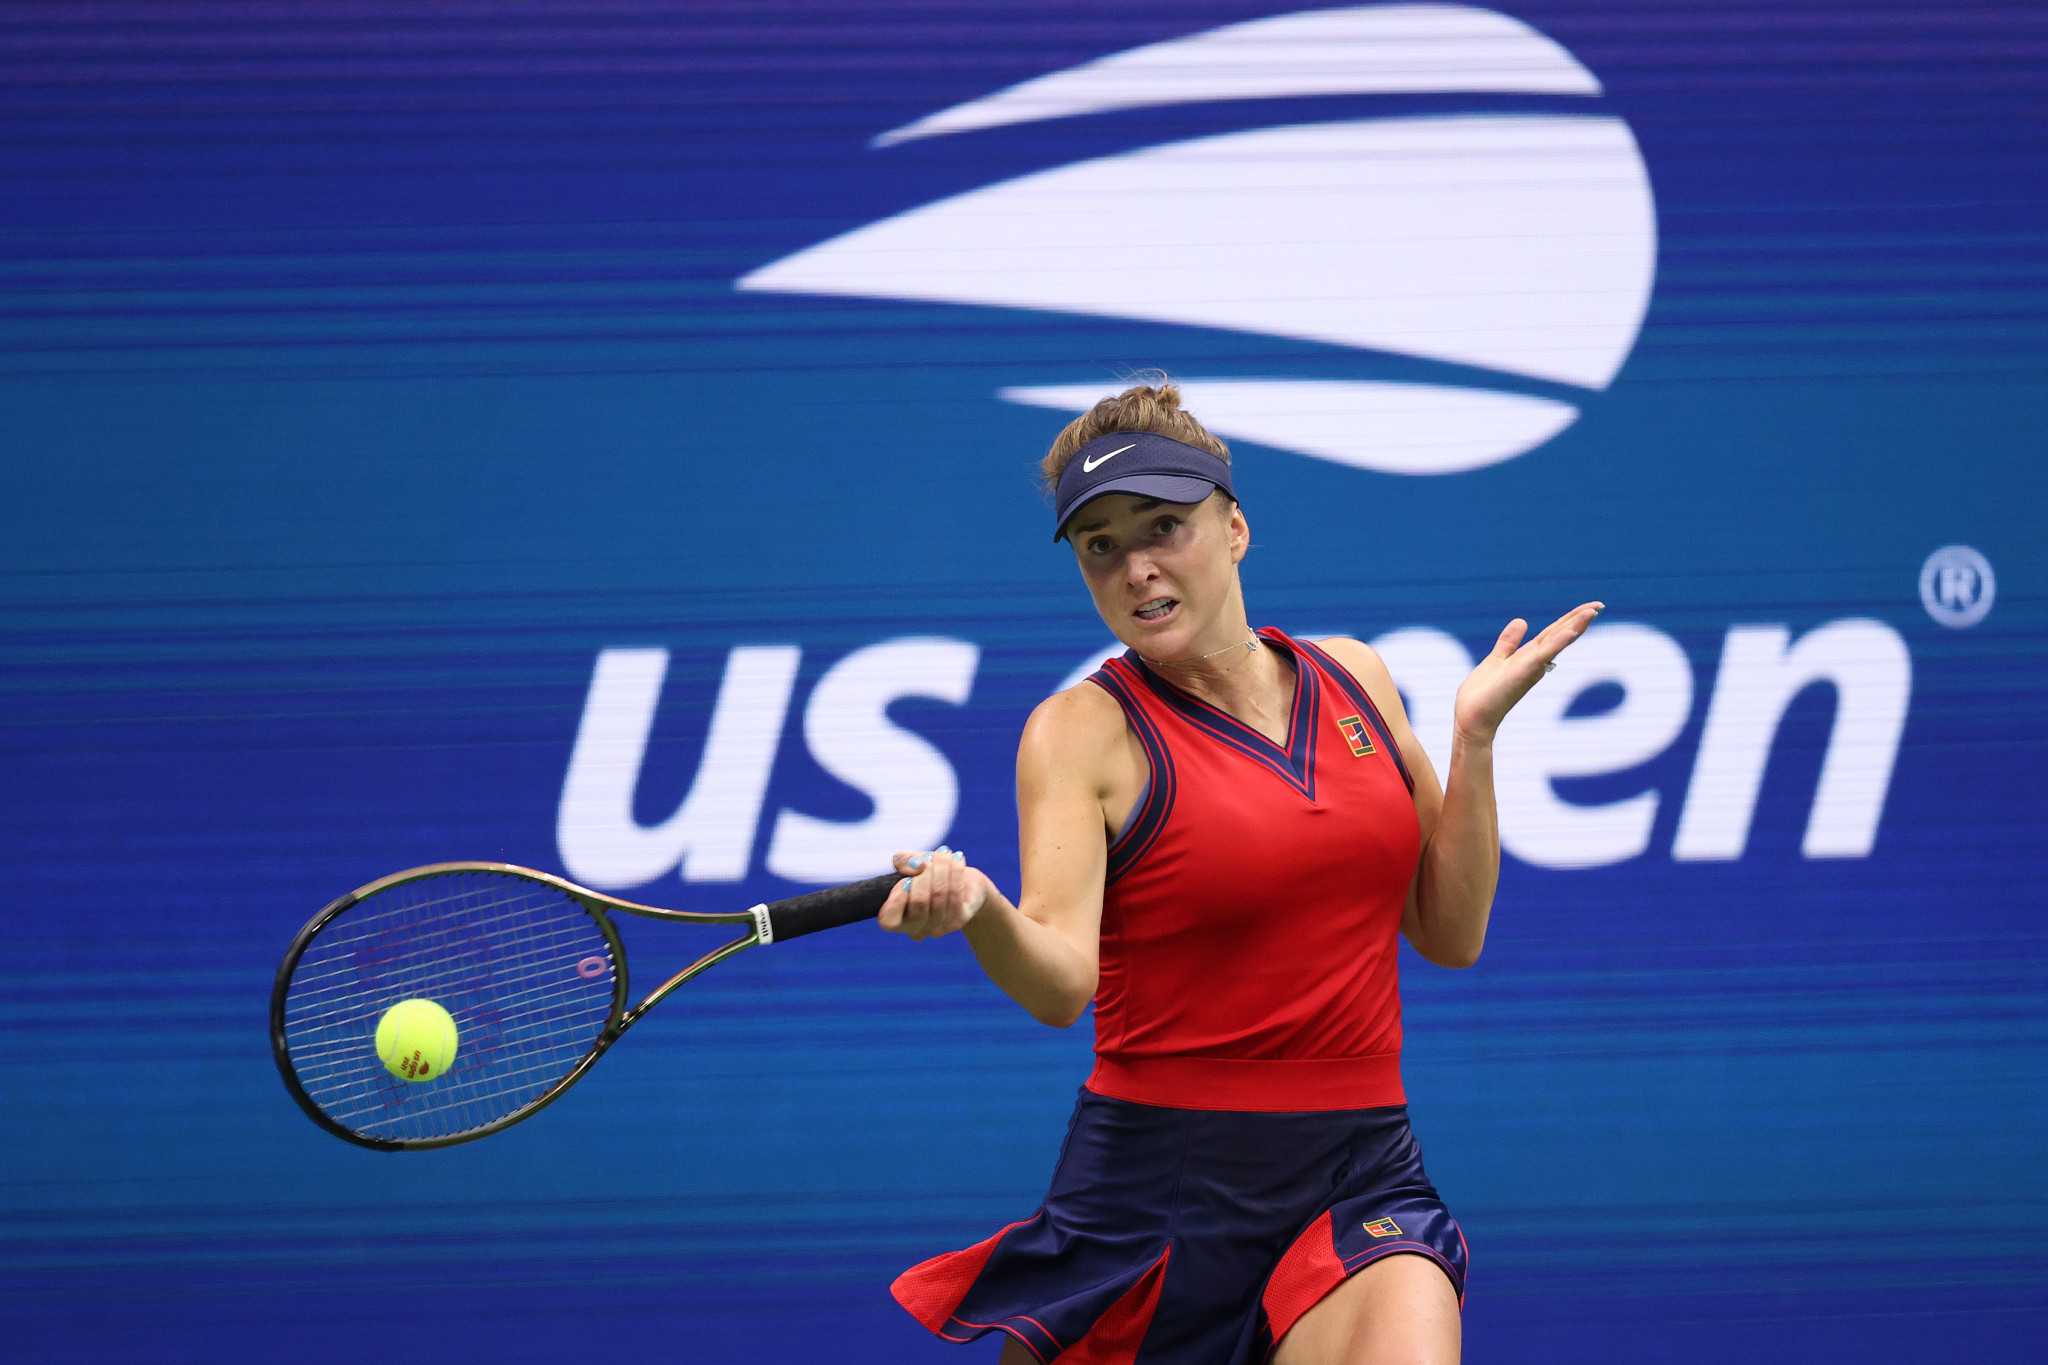 Elina Svitolina of Ukraine defeated Simona Halep in straight sets to reach the US Open semi-finals ©Getty Images